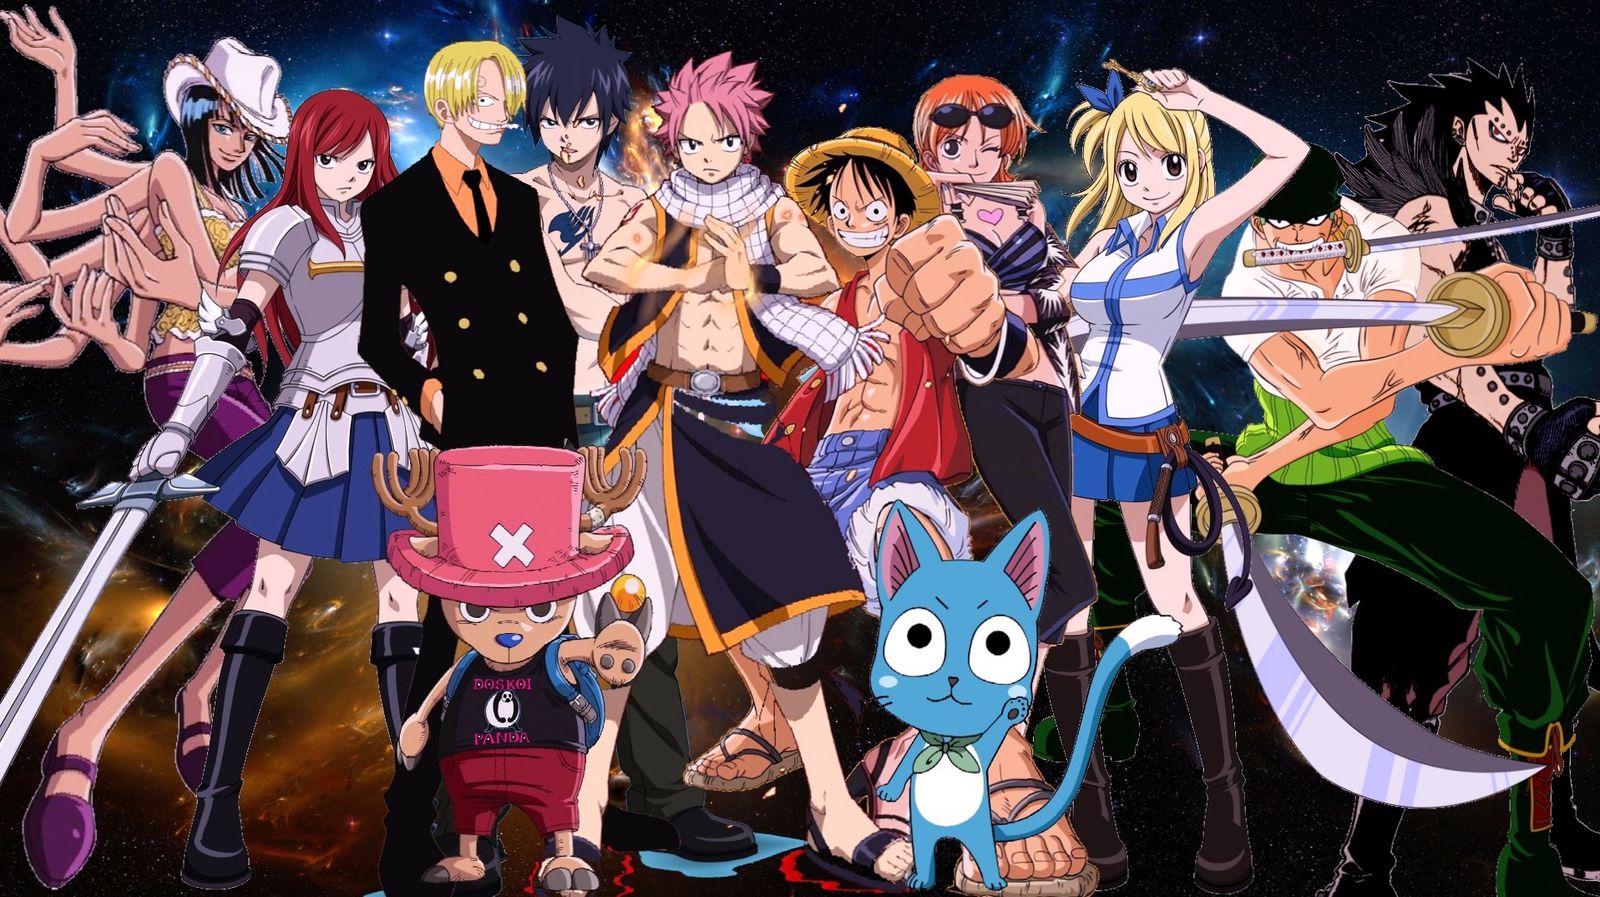 ob_5a9cc4_fairy-tail-x-one-piece-crossover-by-negator7-d4l0.jpg